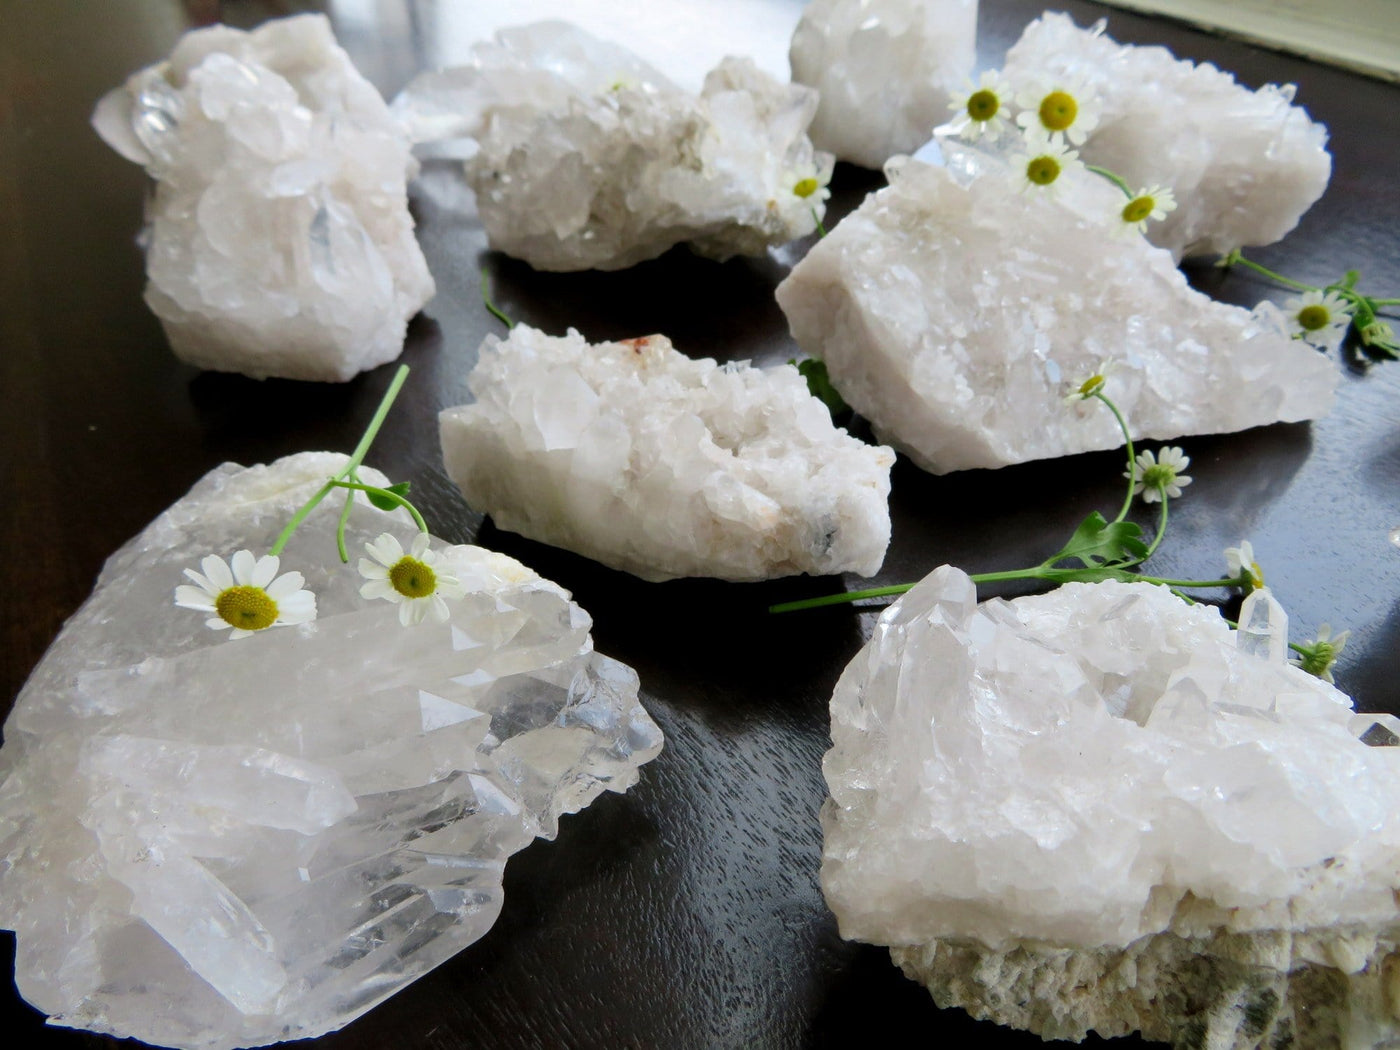 crystal quartz clusters with decorations in the background